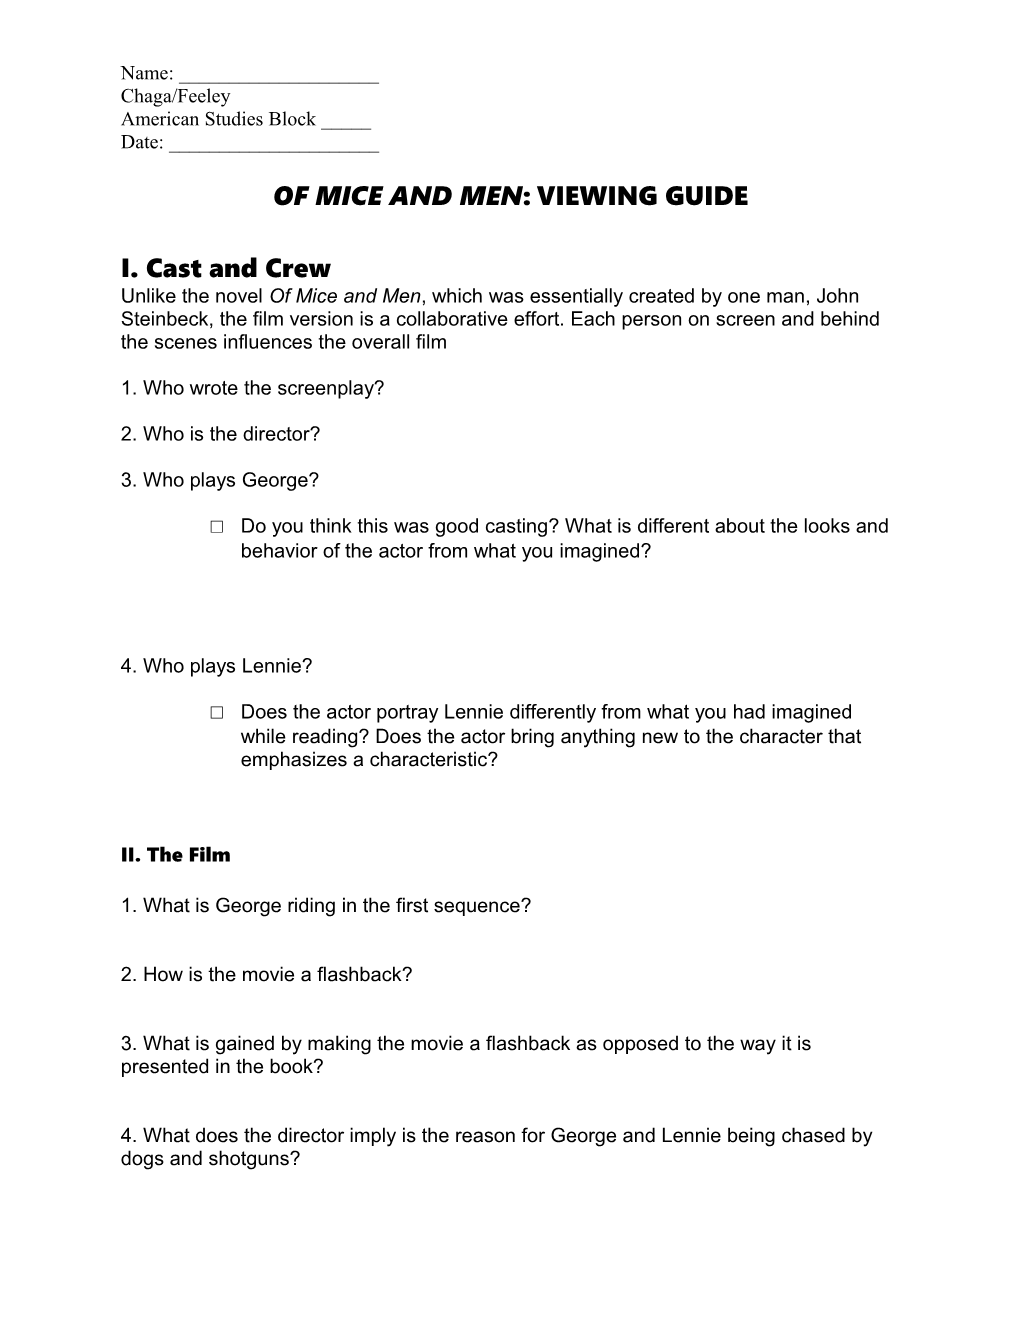 Of Mice and Men: Viewing Guide